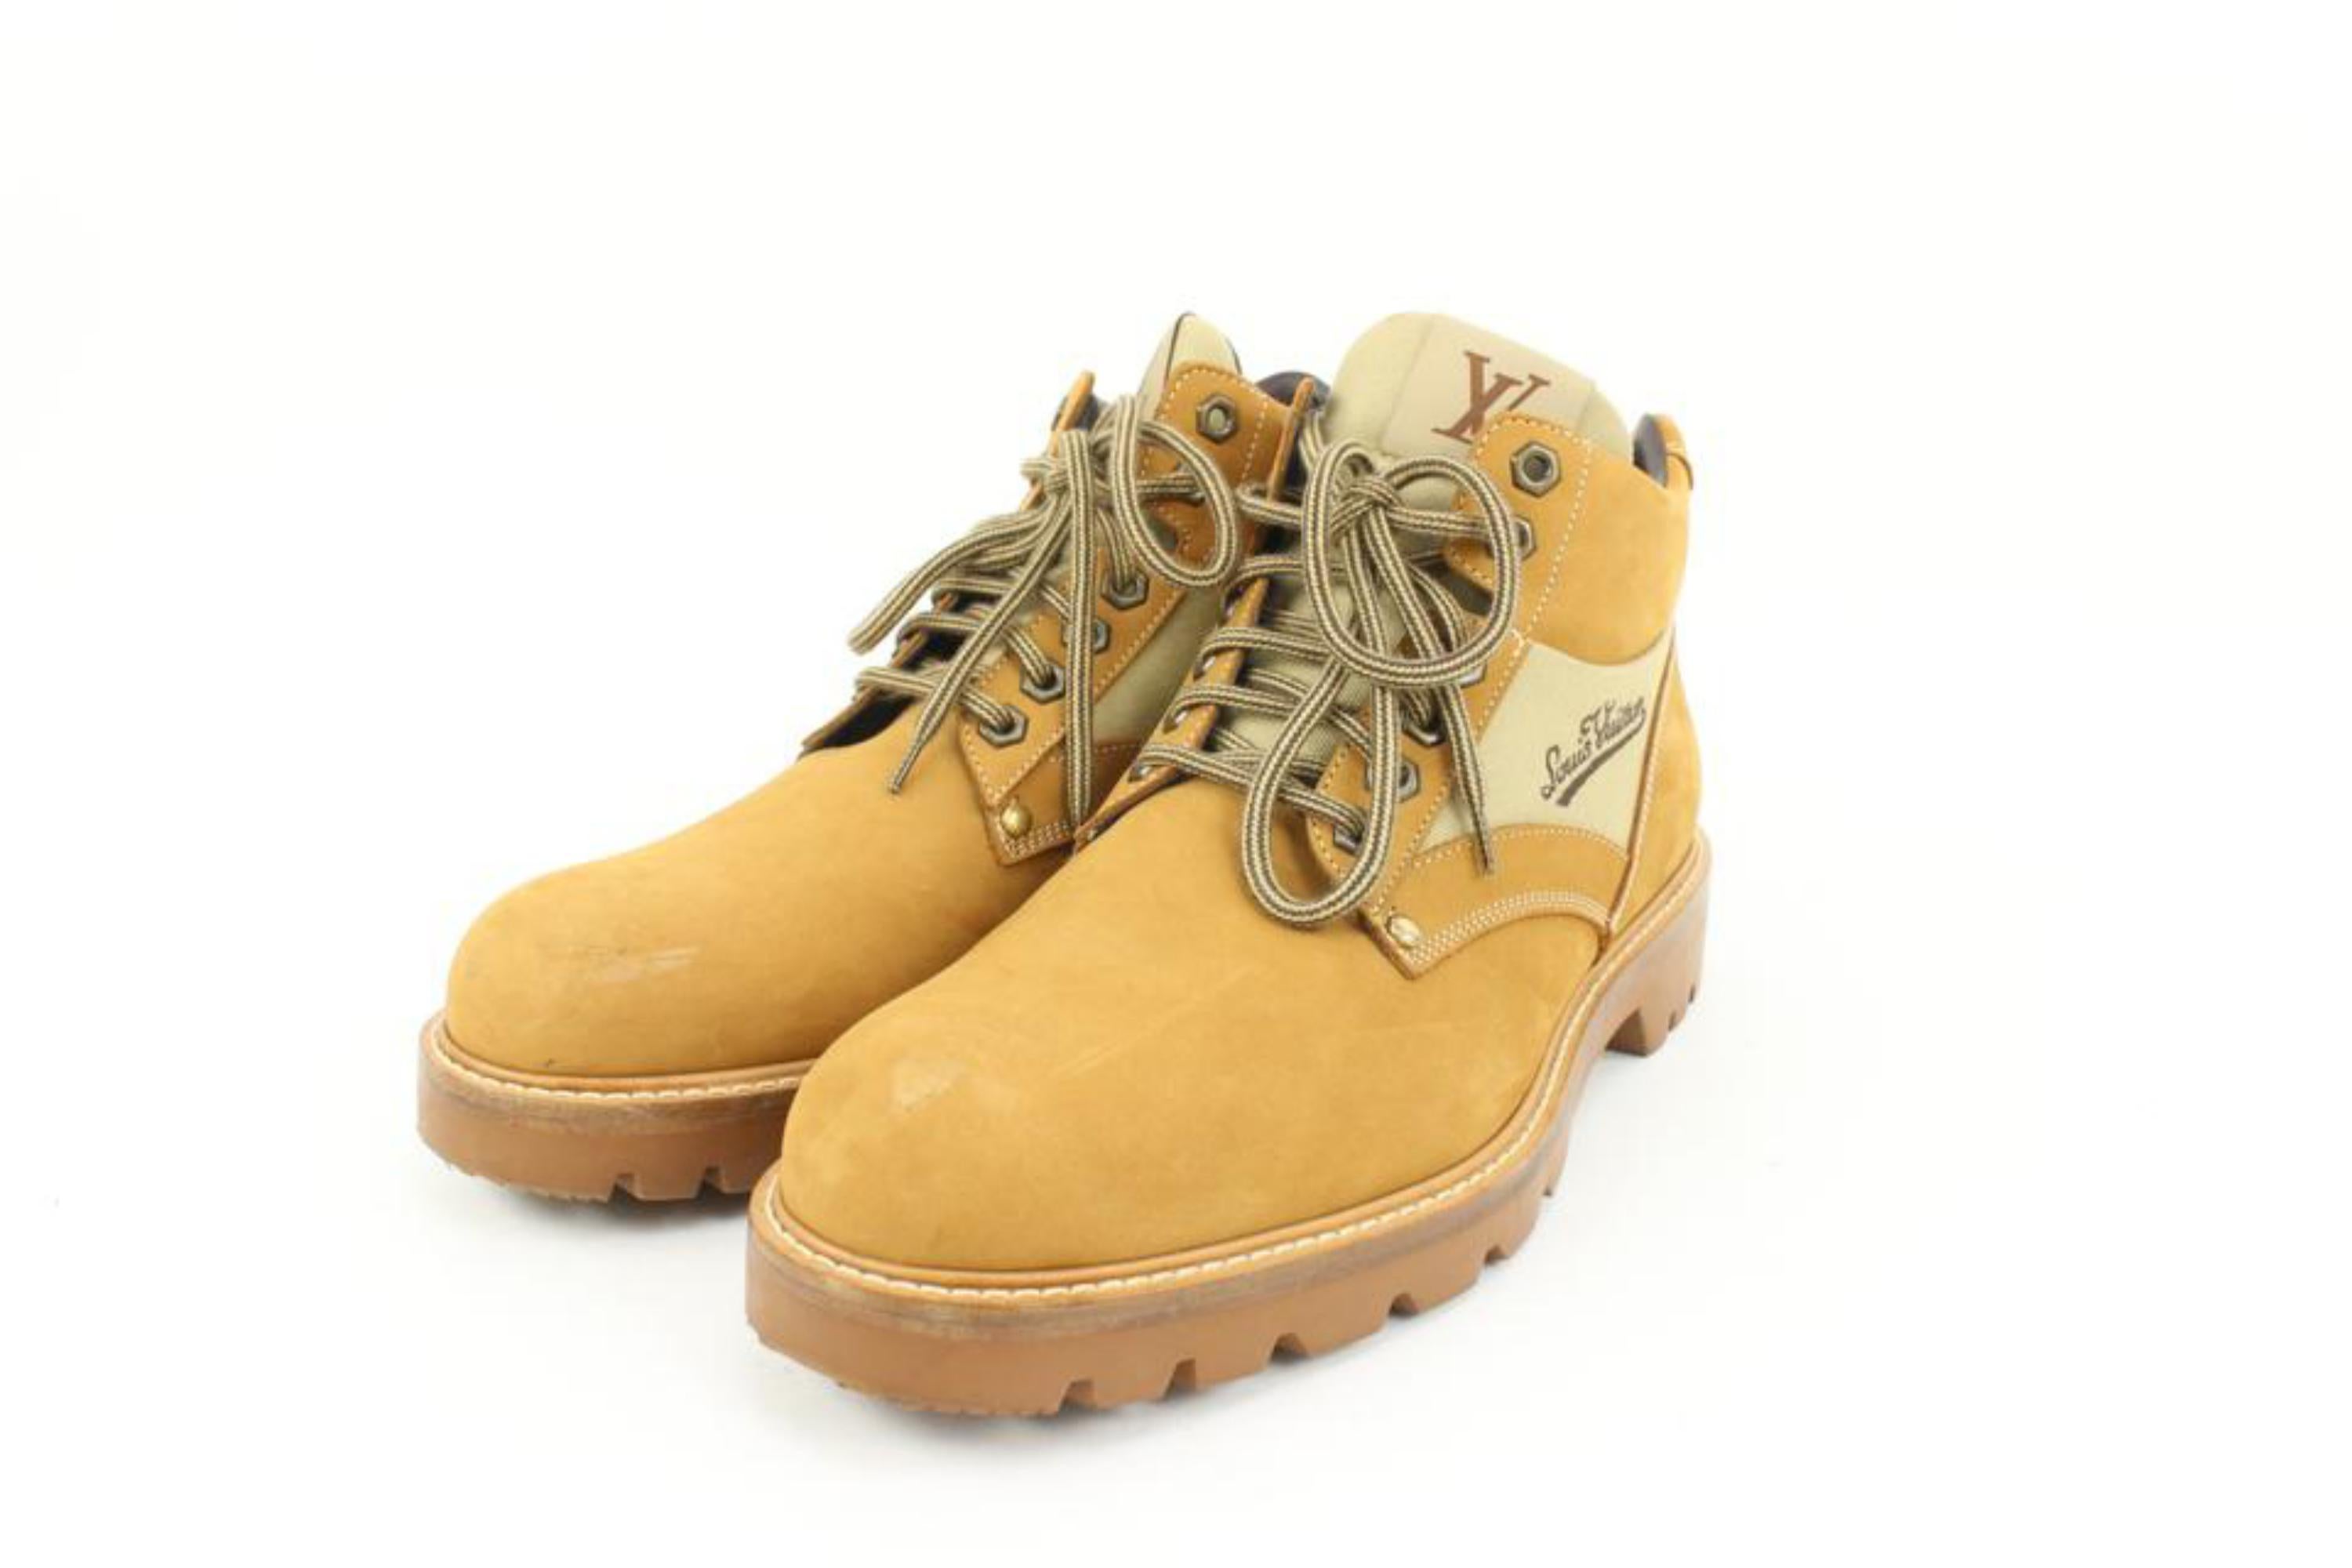 Louis Vuitton Men's 10 US Wheat Nubuck Oberkampf Boots 35lv21s
Date Code/Serial Number: FD 1106
Made In: Italy 
Measurements: Length:  12.6